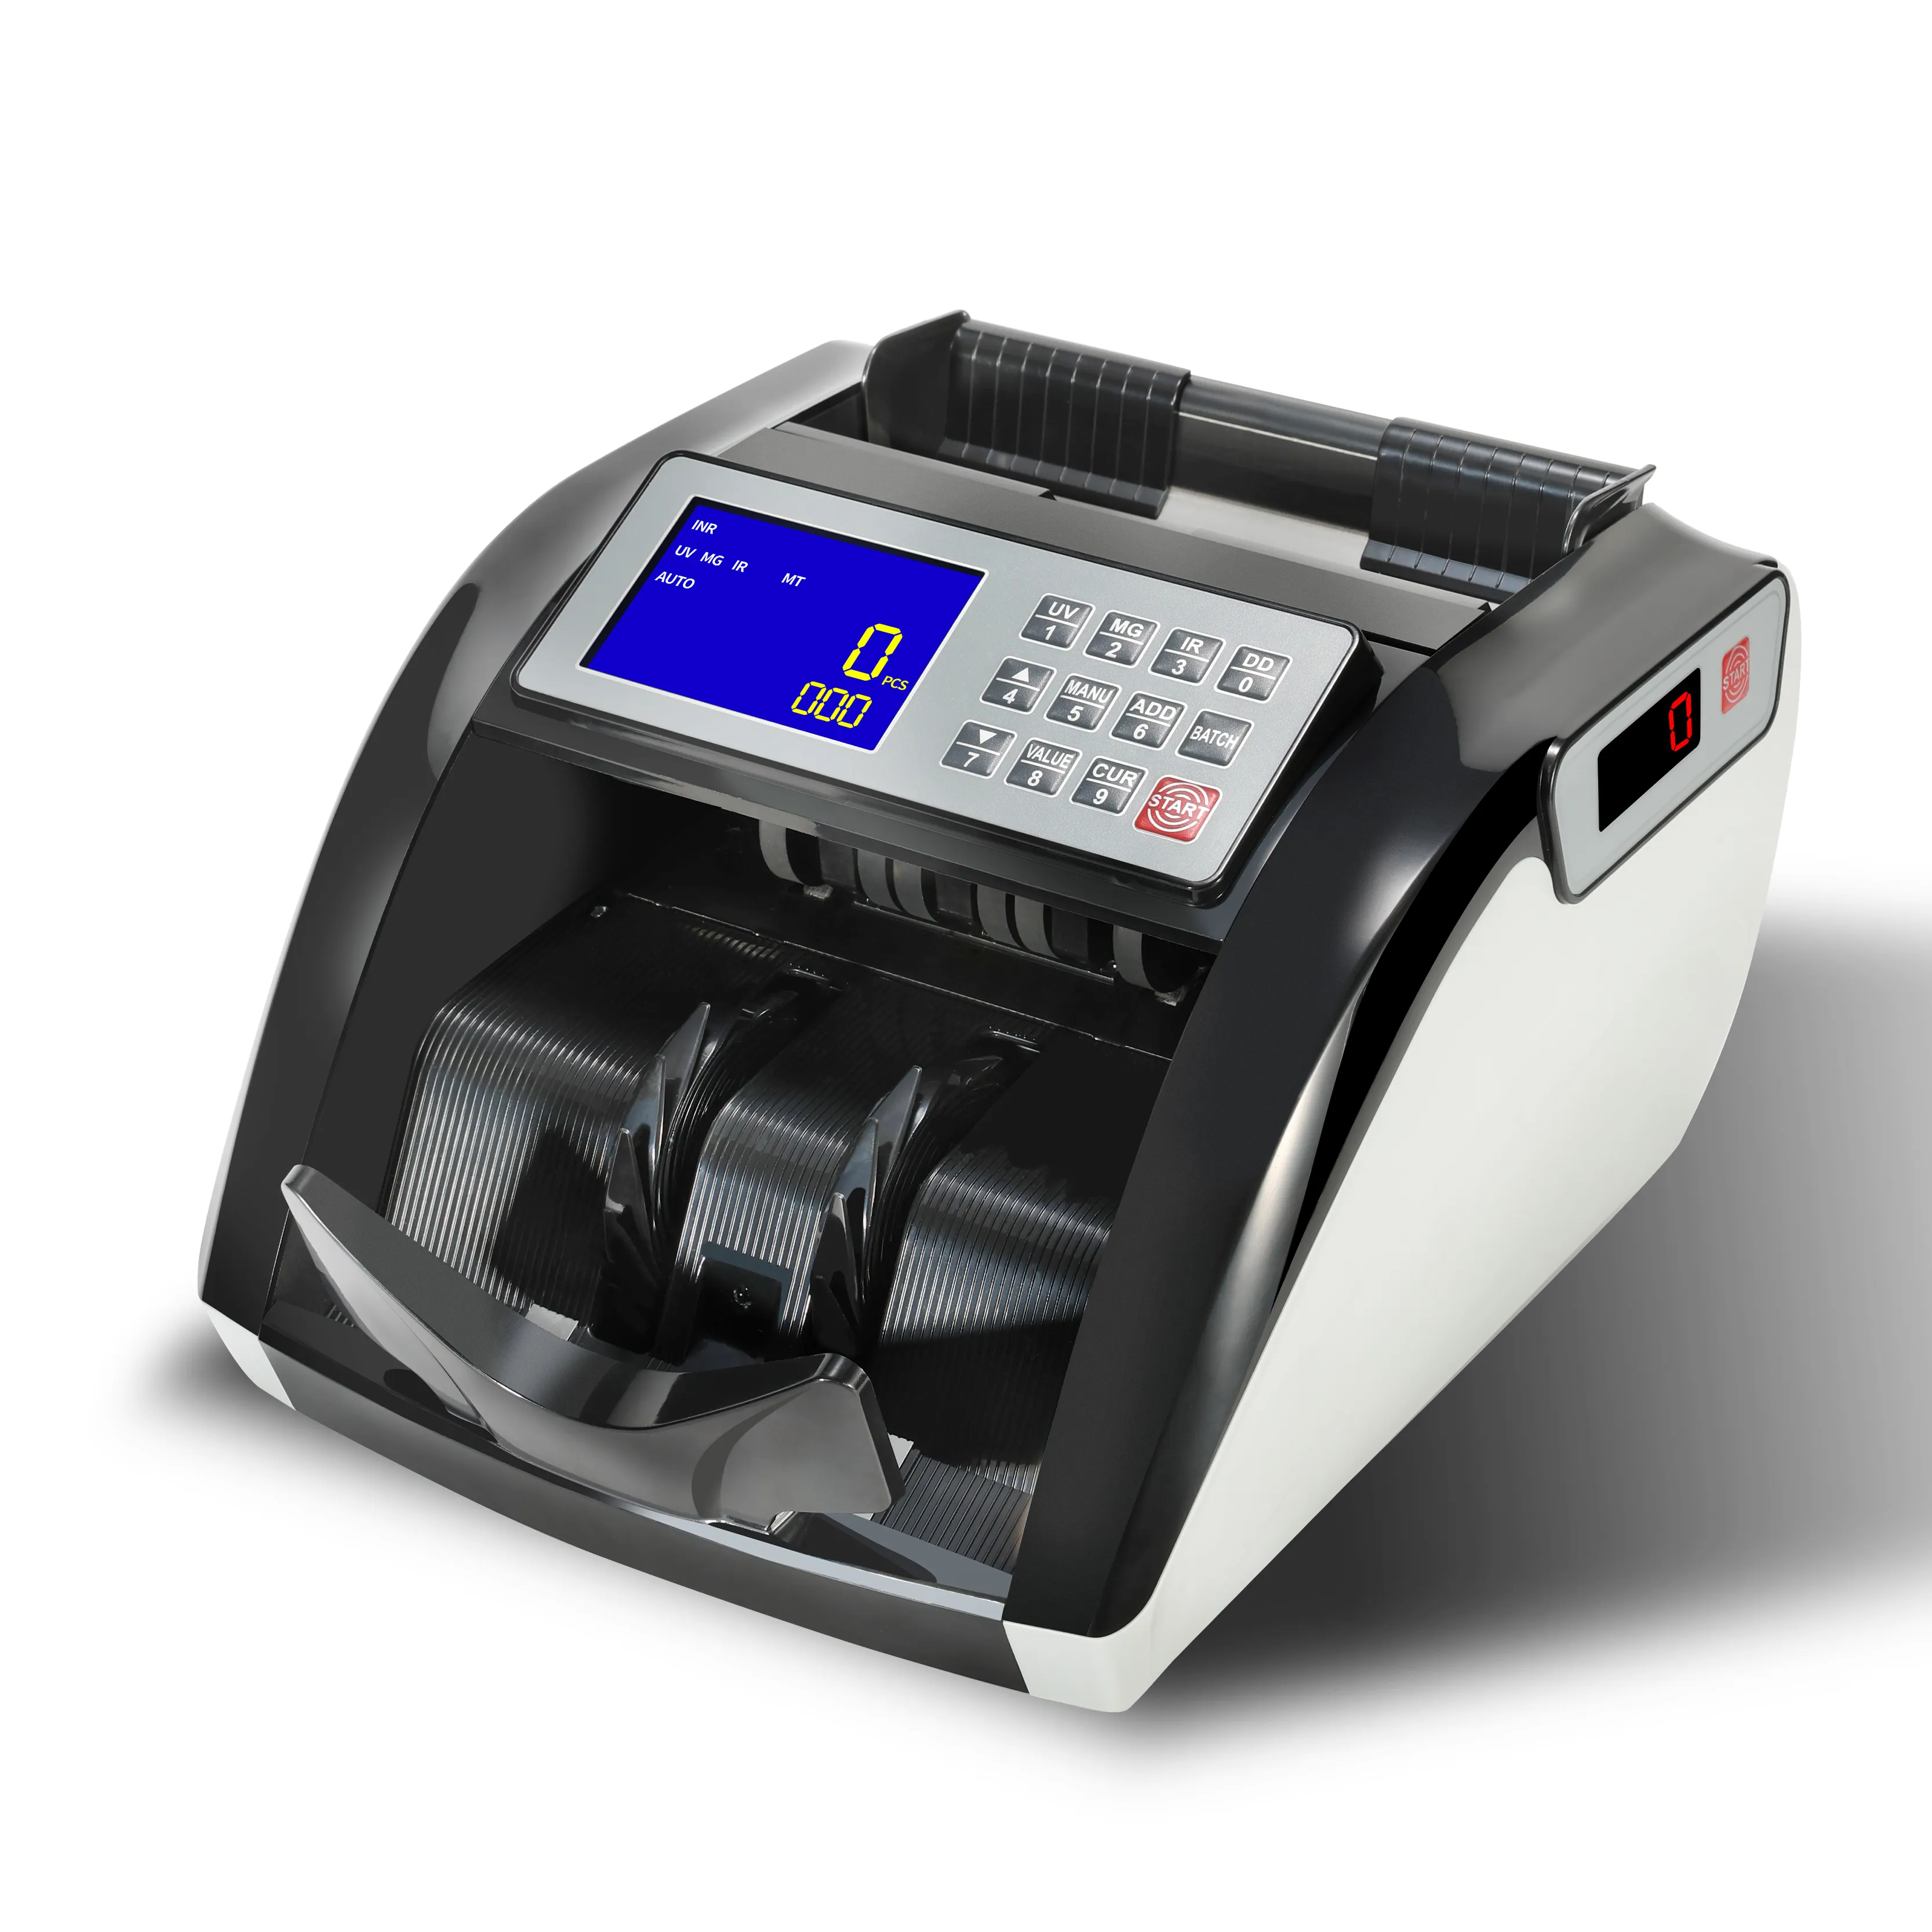 P40 manual counter with TFT IR UV MG High sensitivity money counting machine intelligent hot selling Technology money